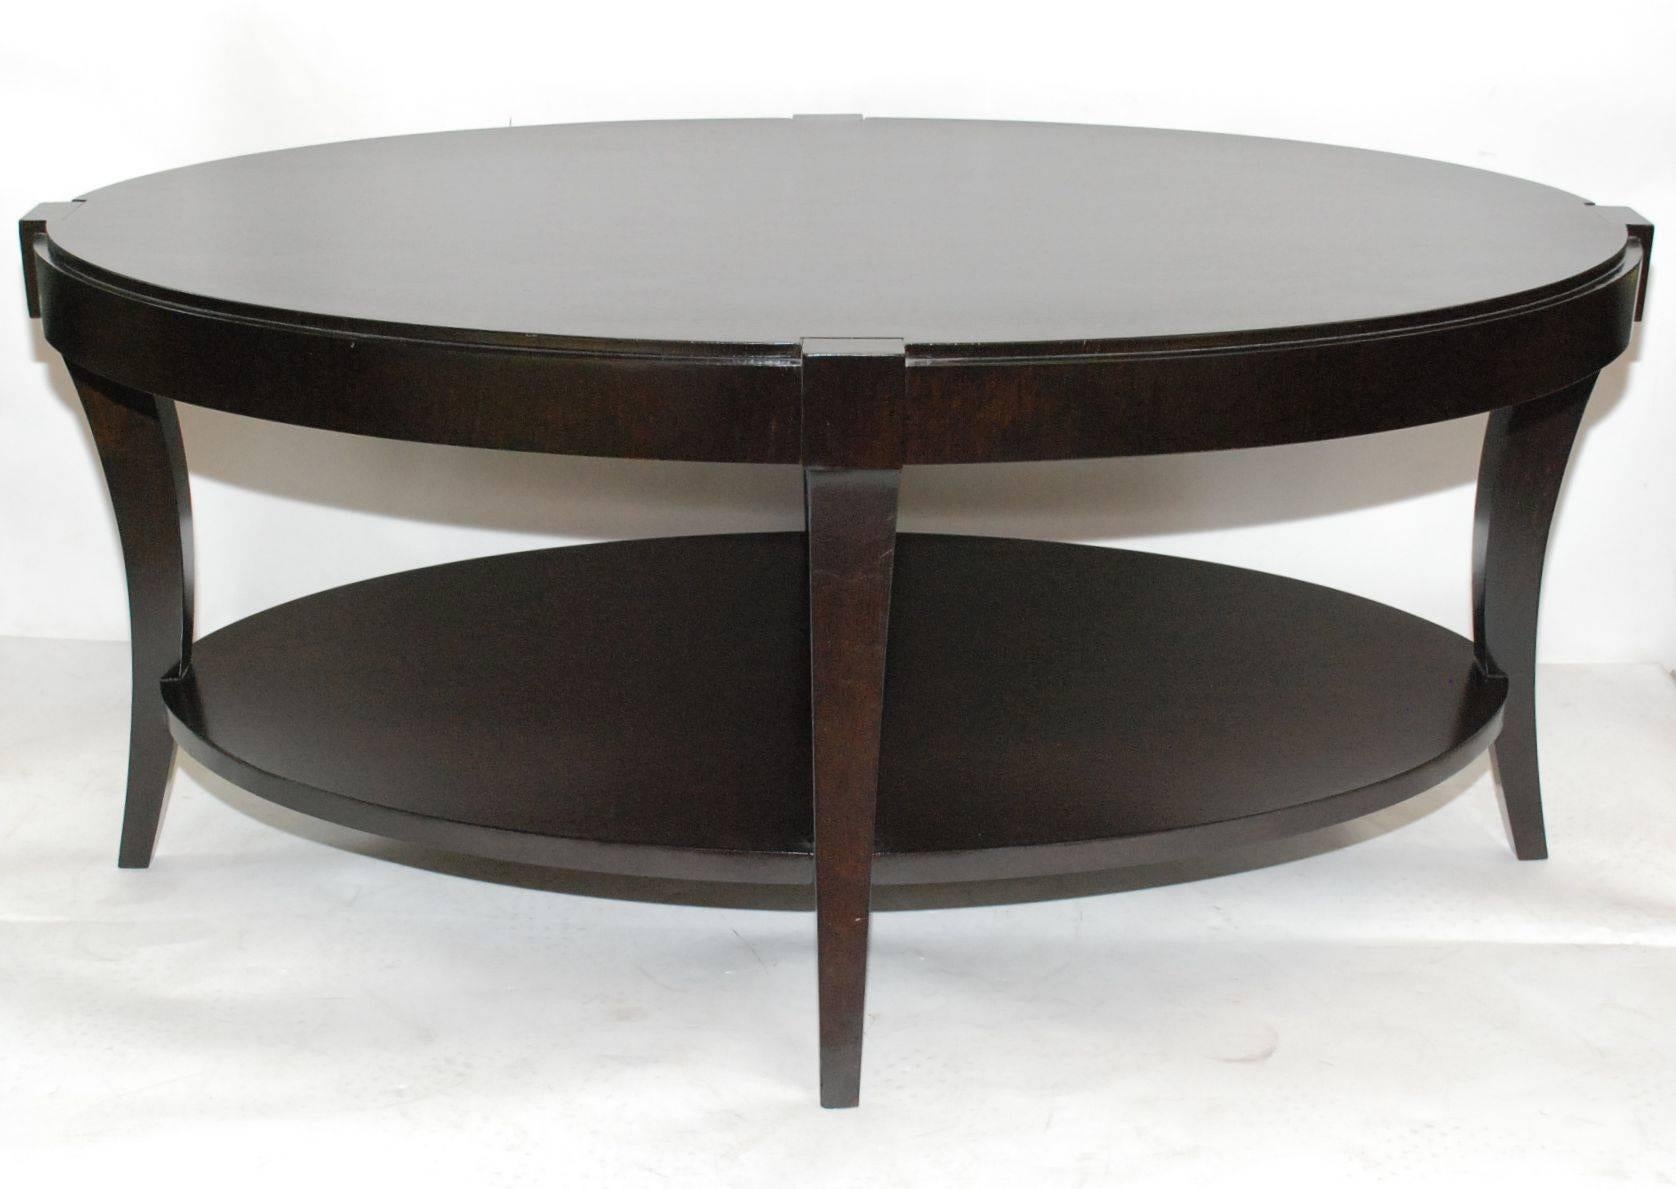 Great oval dark walnut finish on solid oak coffee table design by Barbara Barry for Baker Company. (Original stamped).